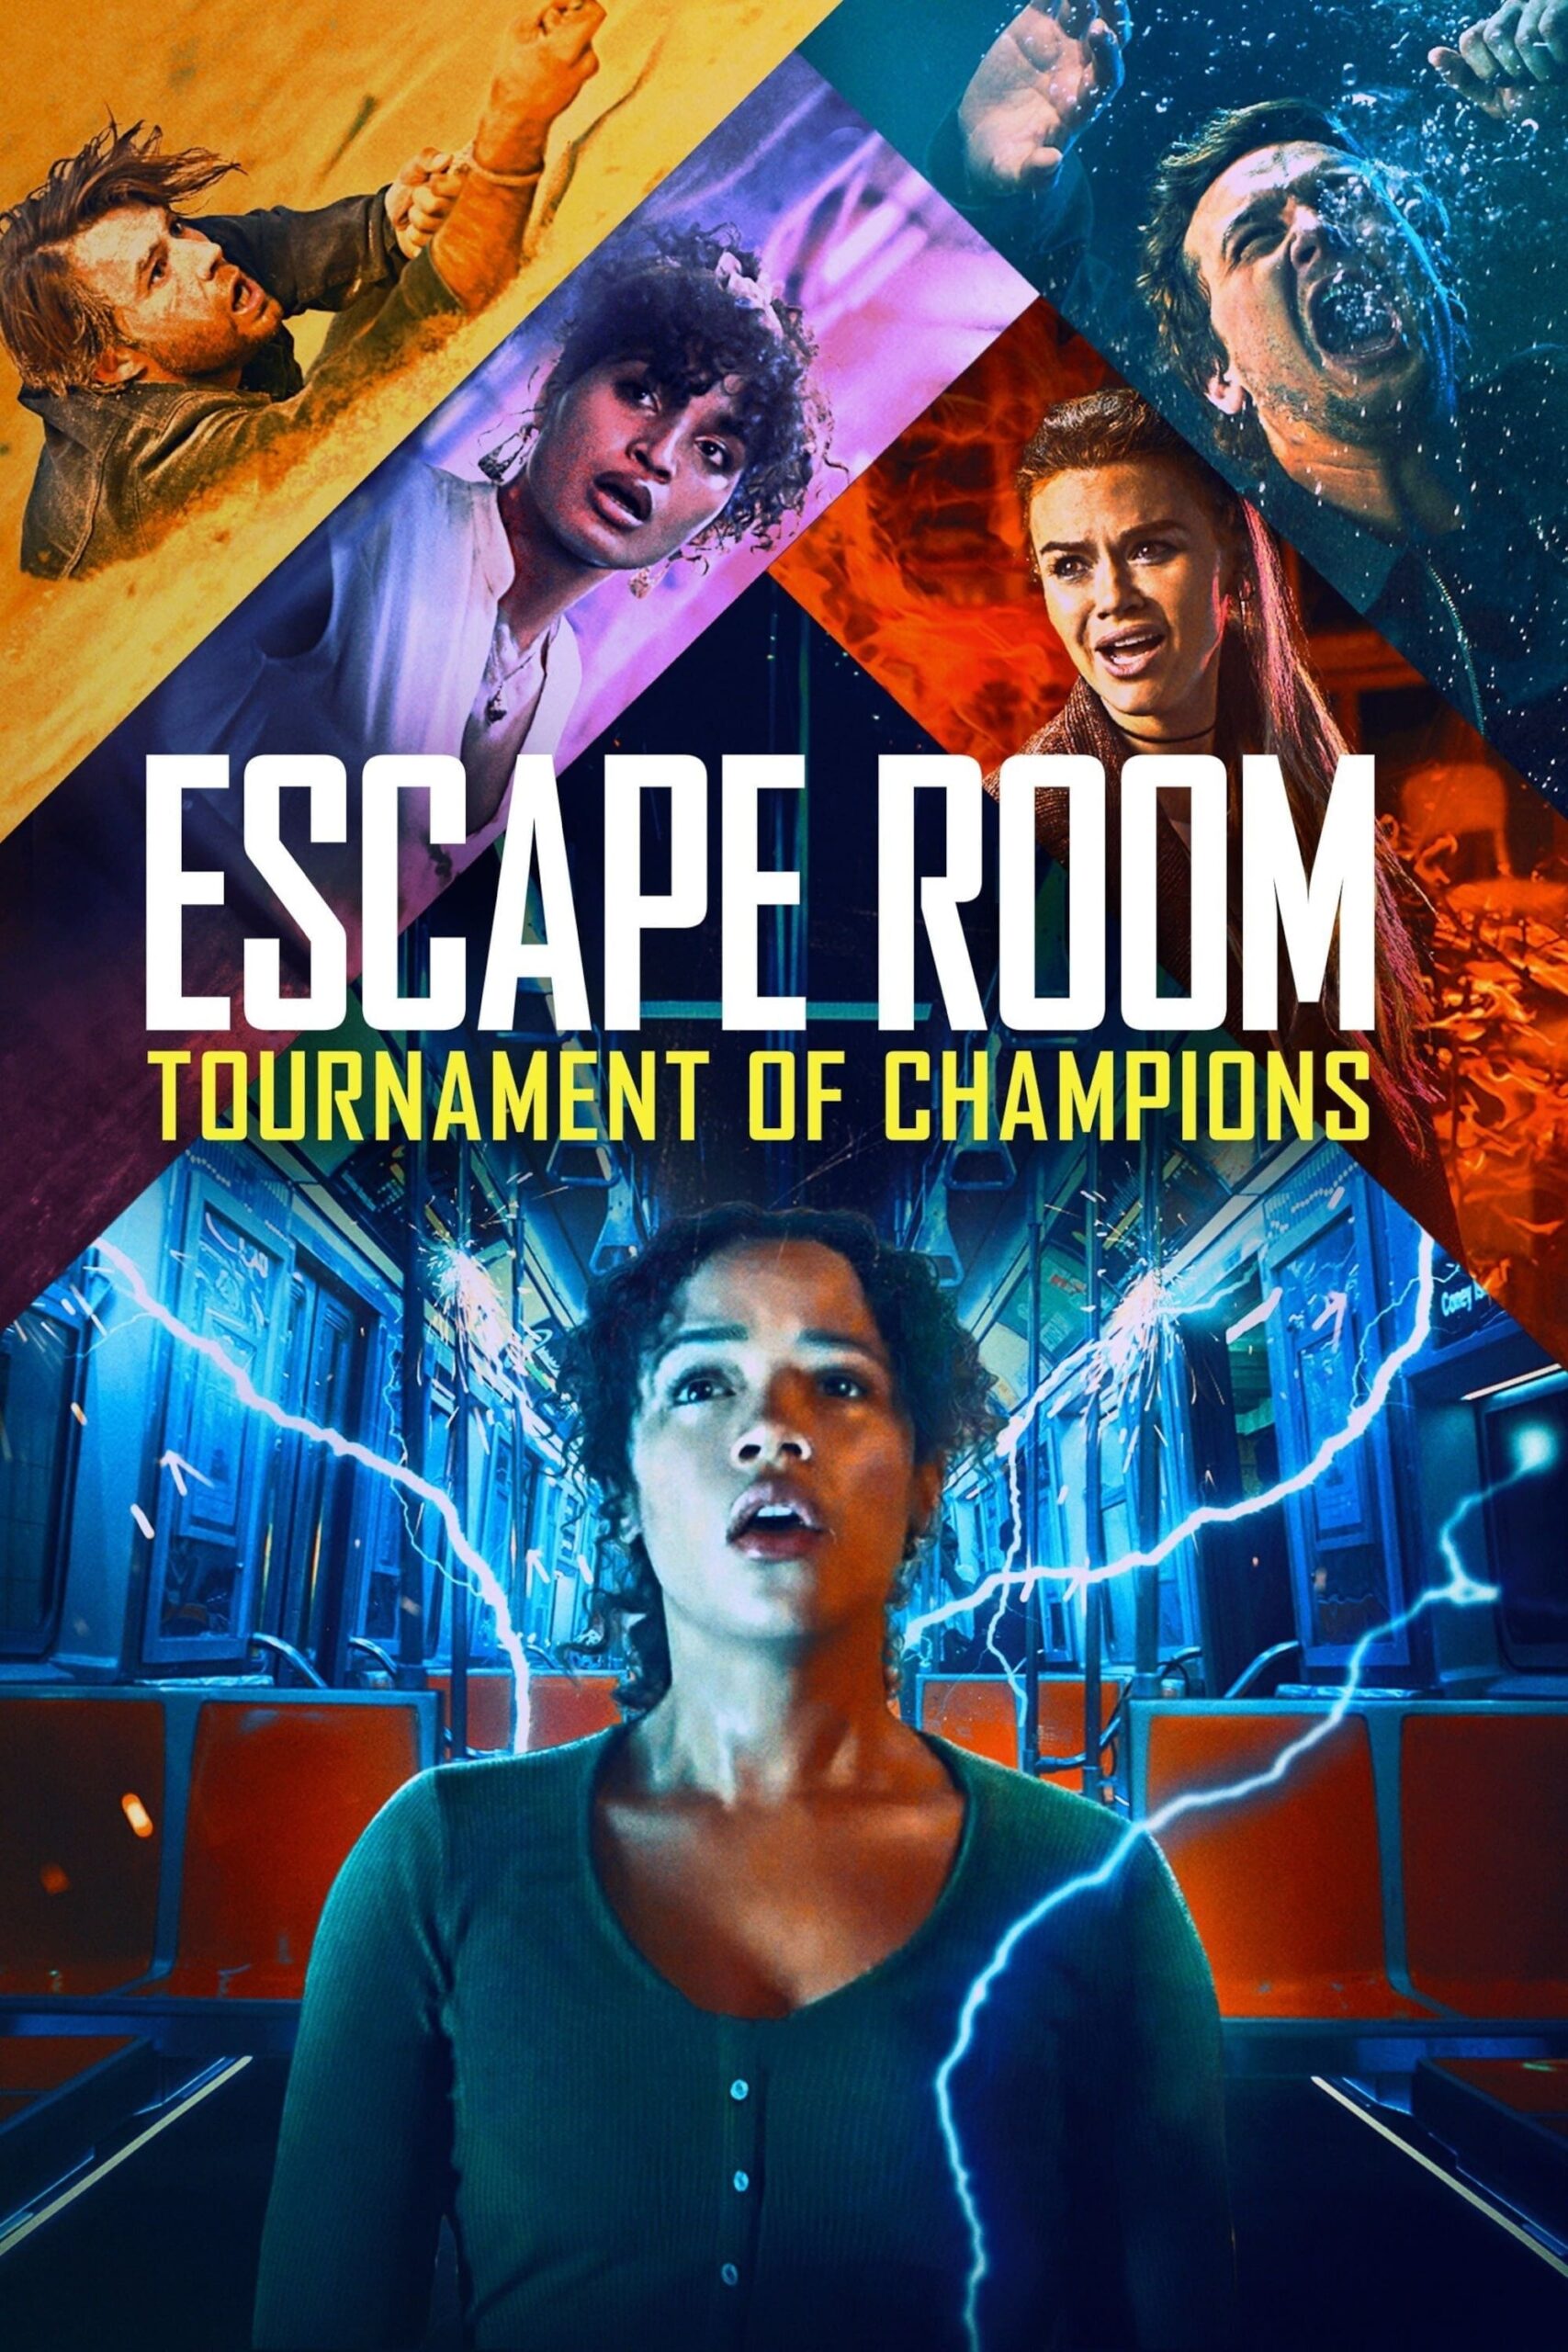 Poster for the movie "Escape Room: Tournament of Champions"